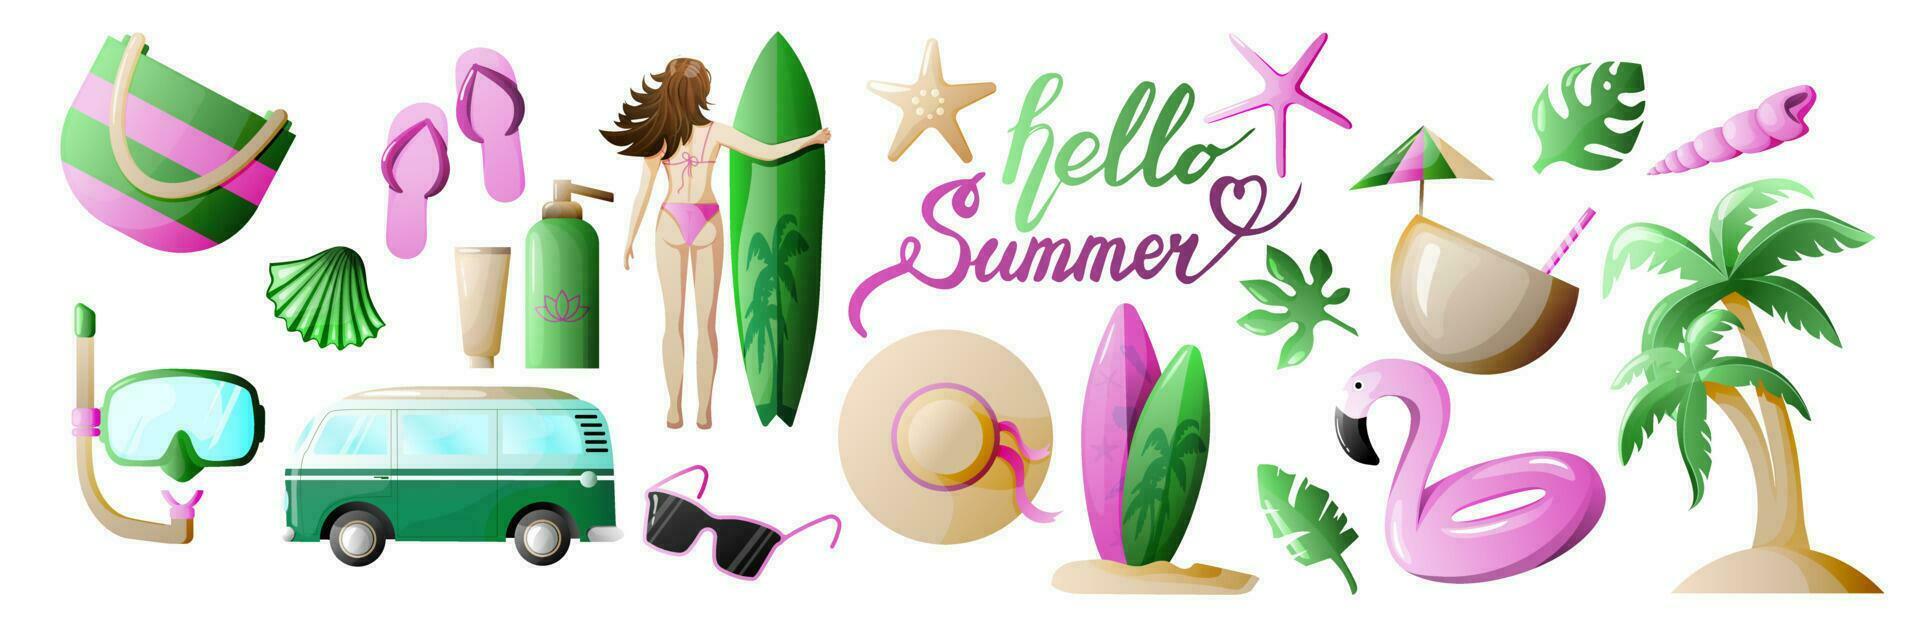 Colourful Set of cute summer icons seashells, coconut, starfish, flamingo, surfboard, palms, hat, leaves, minibus. Vacation accessories for sea holidays. Beach stuff for summer travel set vector